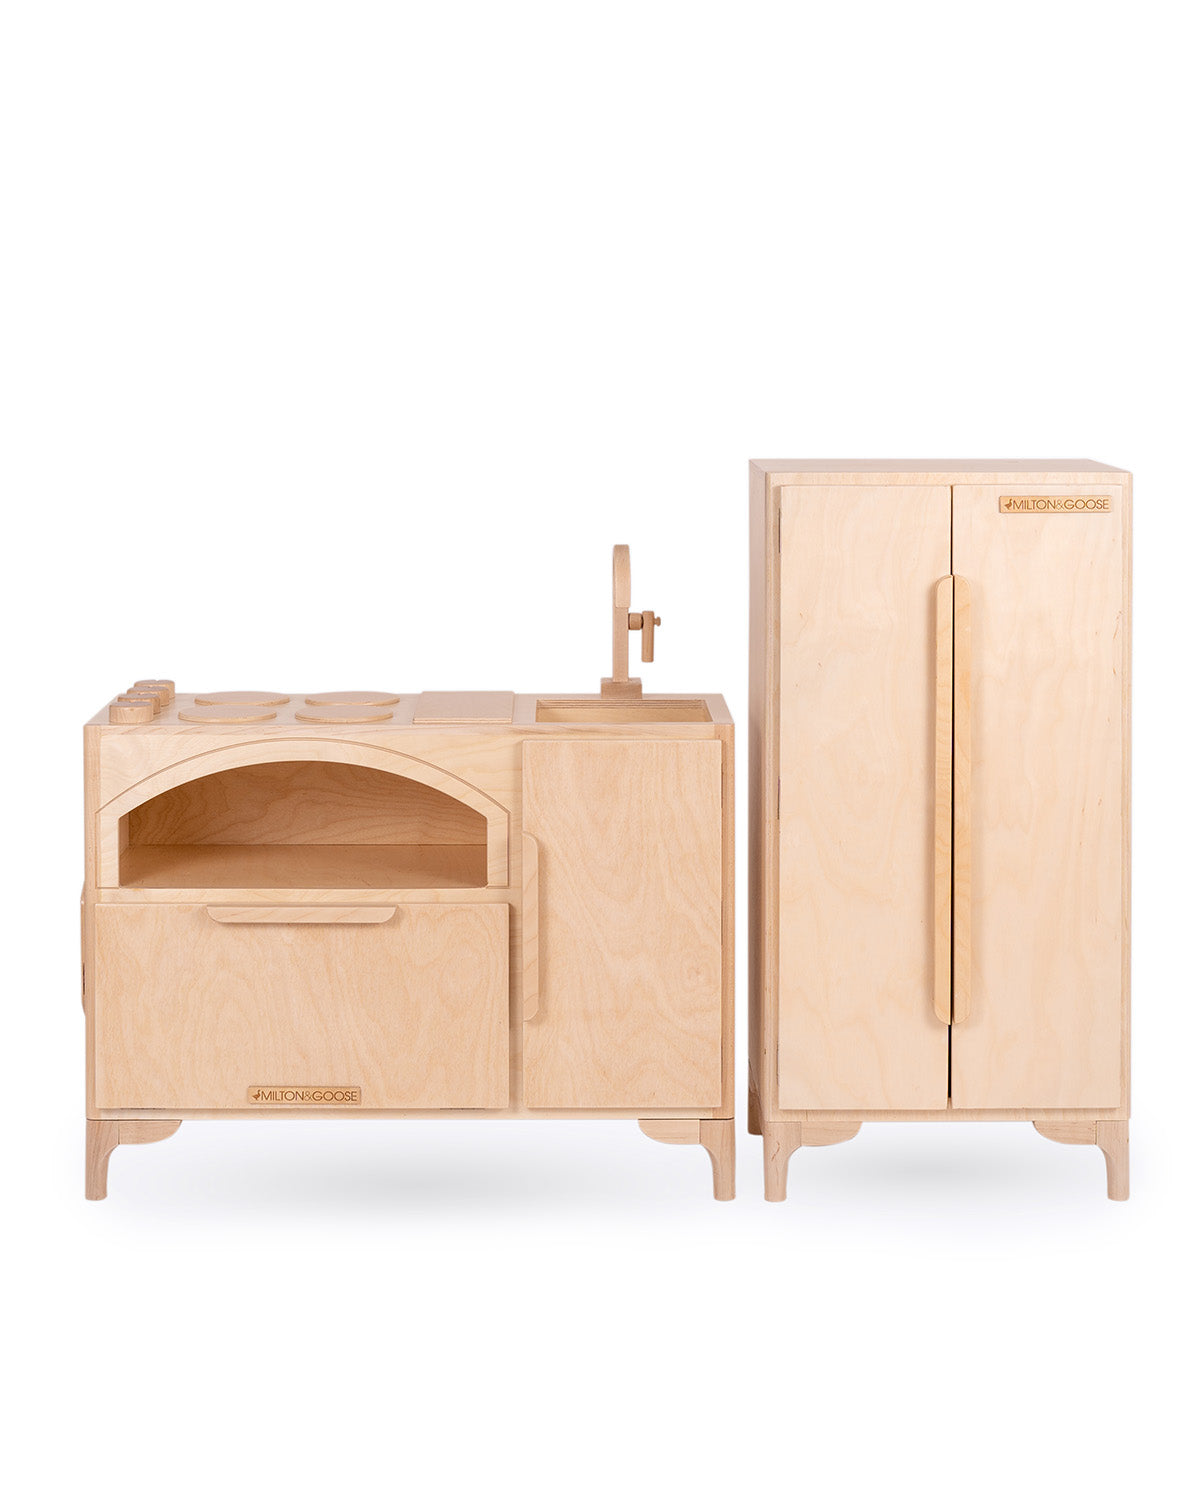 Milton & Goose Luca Play Kitchen collection in a natural finish. This 2-piece collection includes the Play Kitchen with pizza paddle and play refrigerator.